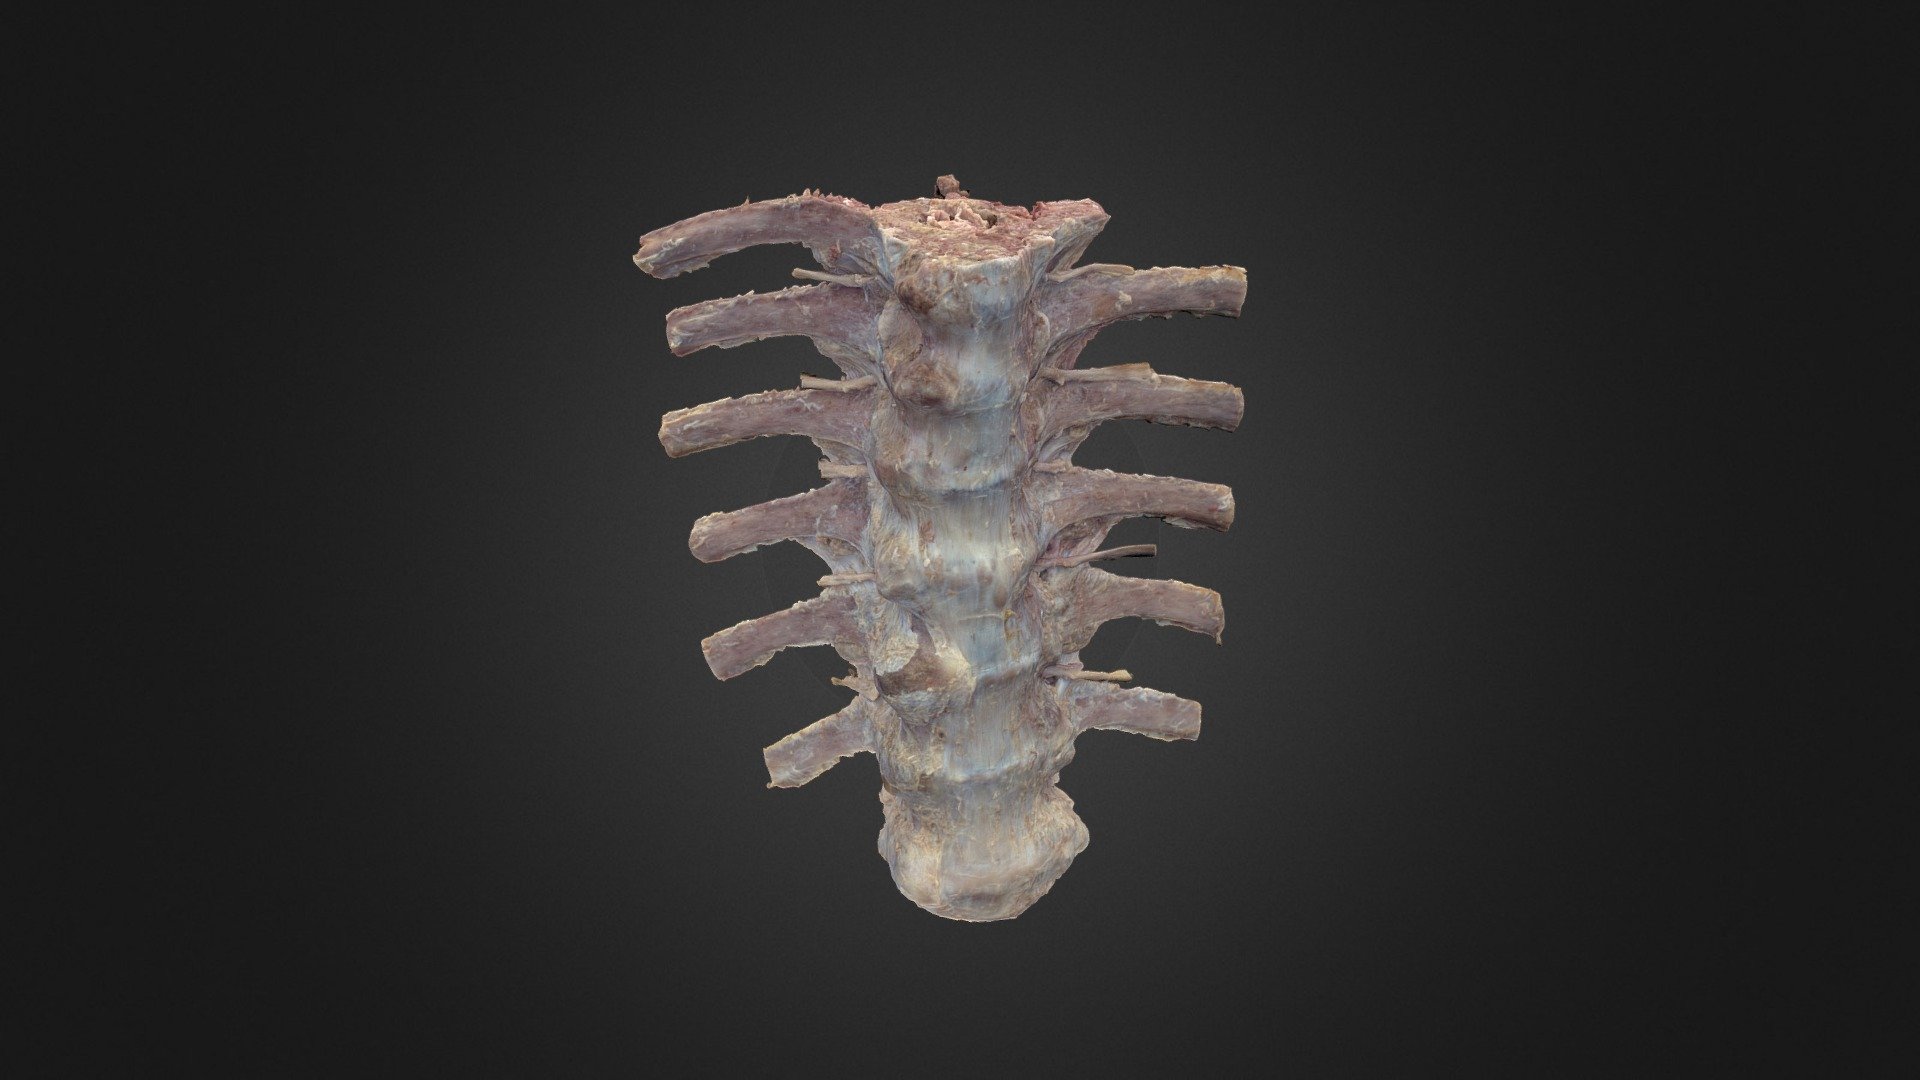 A human prosection showing lower thoracic vertebrae, ribs, and intercostal nerves. 

For more on the thorax, visit: https://clinicalanatomy.ca/thorax/Thorax/story.html

Produced by the HIVE at the University of British Columbia using Reality Capture and Artec Studio. 
 

Credits: 

Dr. Claudia Krebs (Faculty Lead) 

Ishan Dixit 

Connor Dunne 

Monika Fejtek - Thoracic Vertebrae with Ribs - 3D model by UBC Medicine - Educational Media 3d model